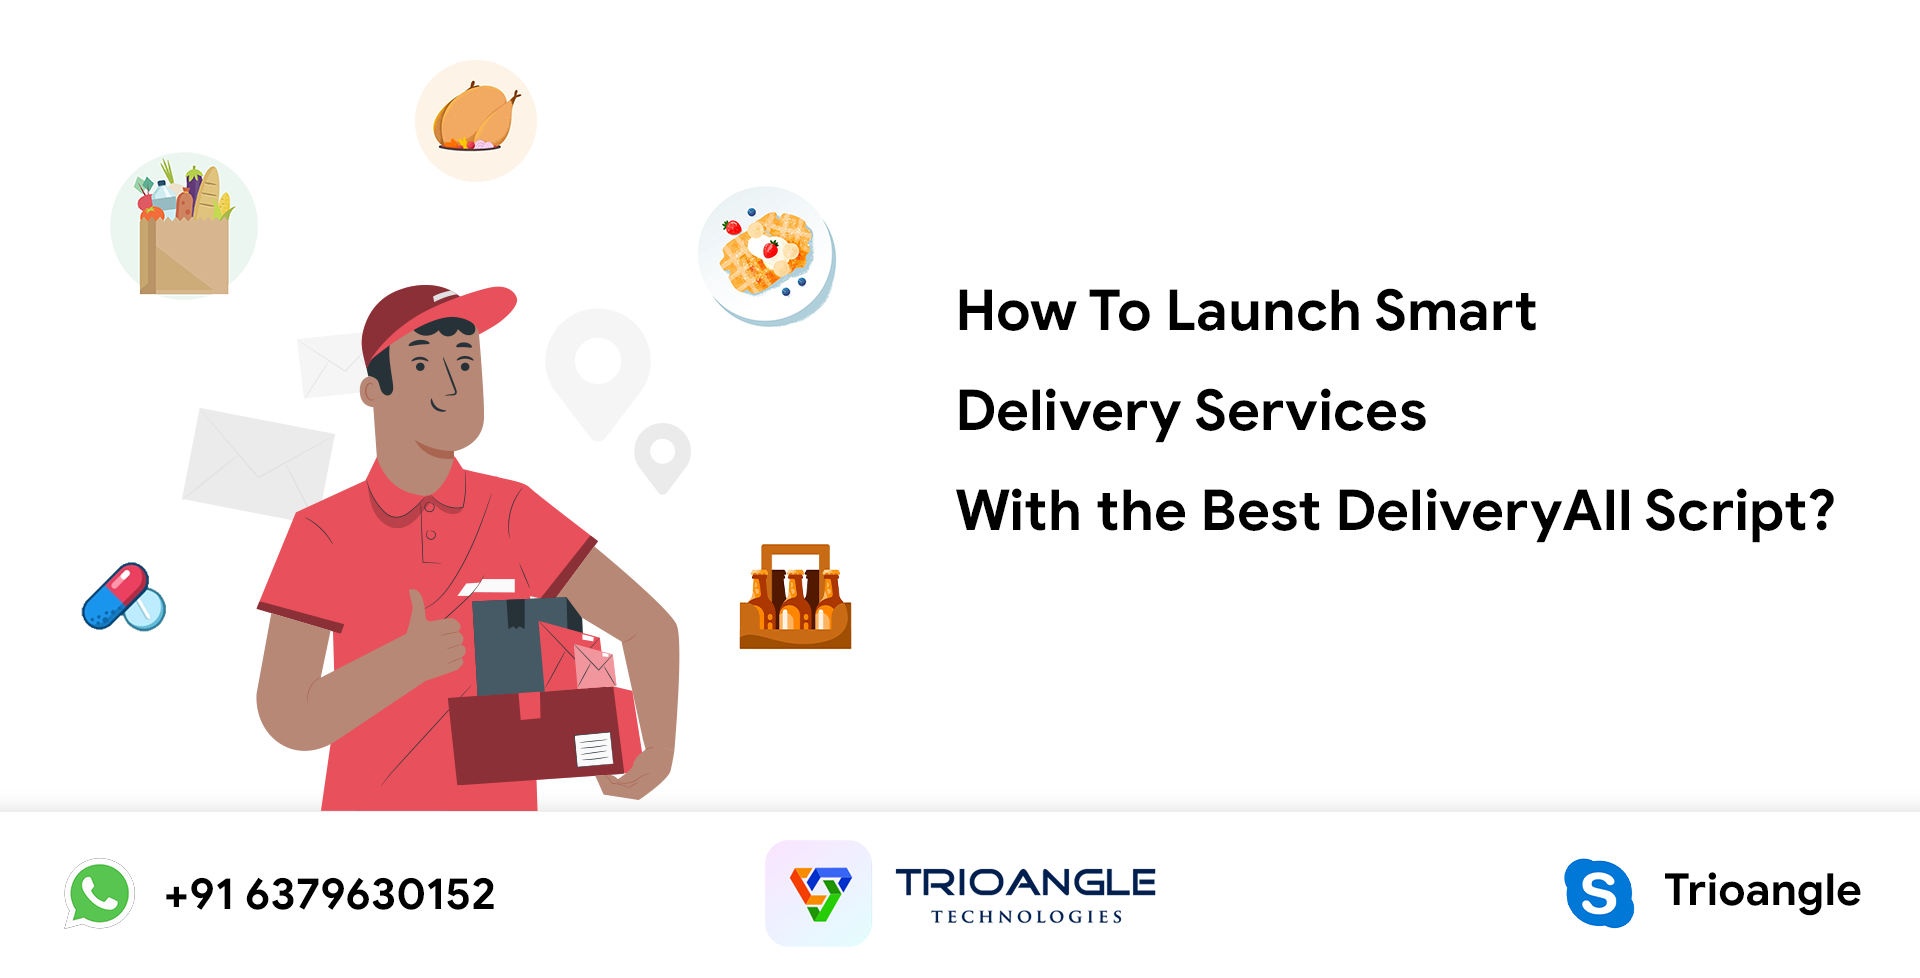 How to Launch Smart Delivery Services With the Best DeliveryAll Script?